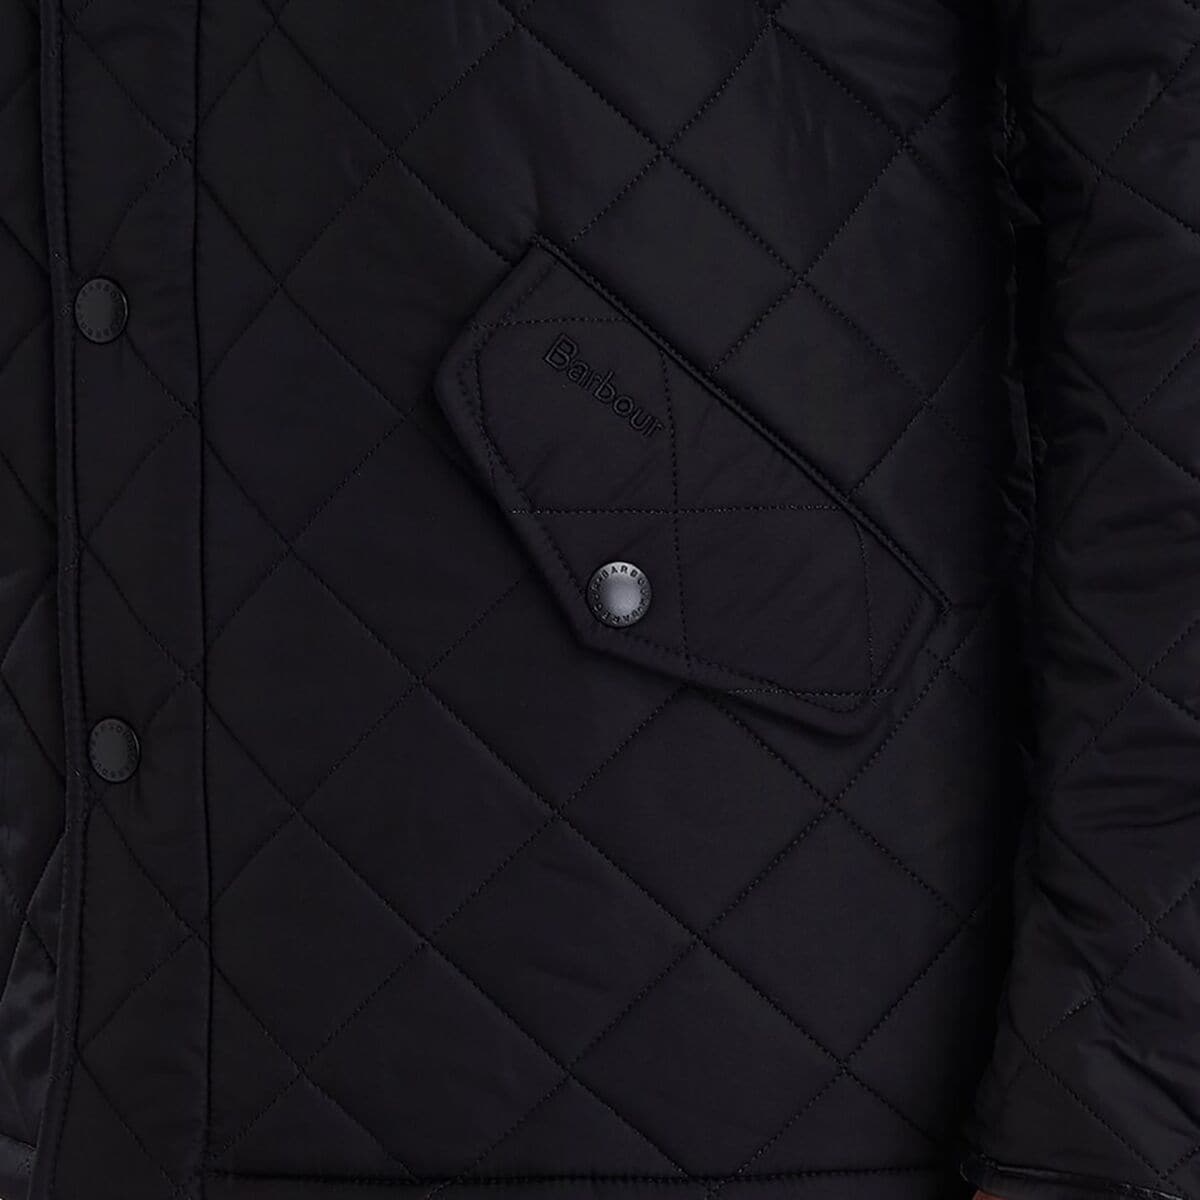 Barbour Powell Quilted Jacket - Men's - Clothing